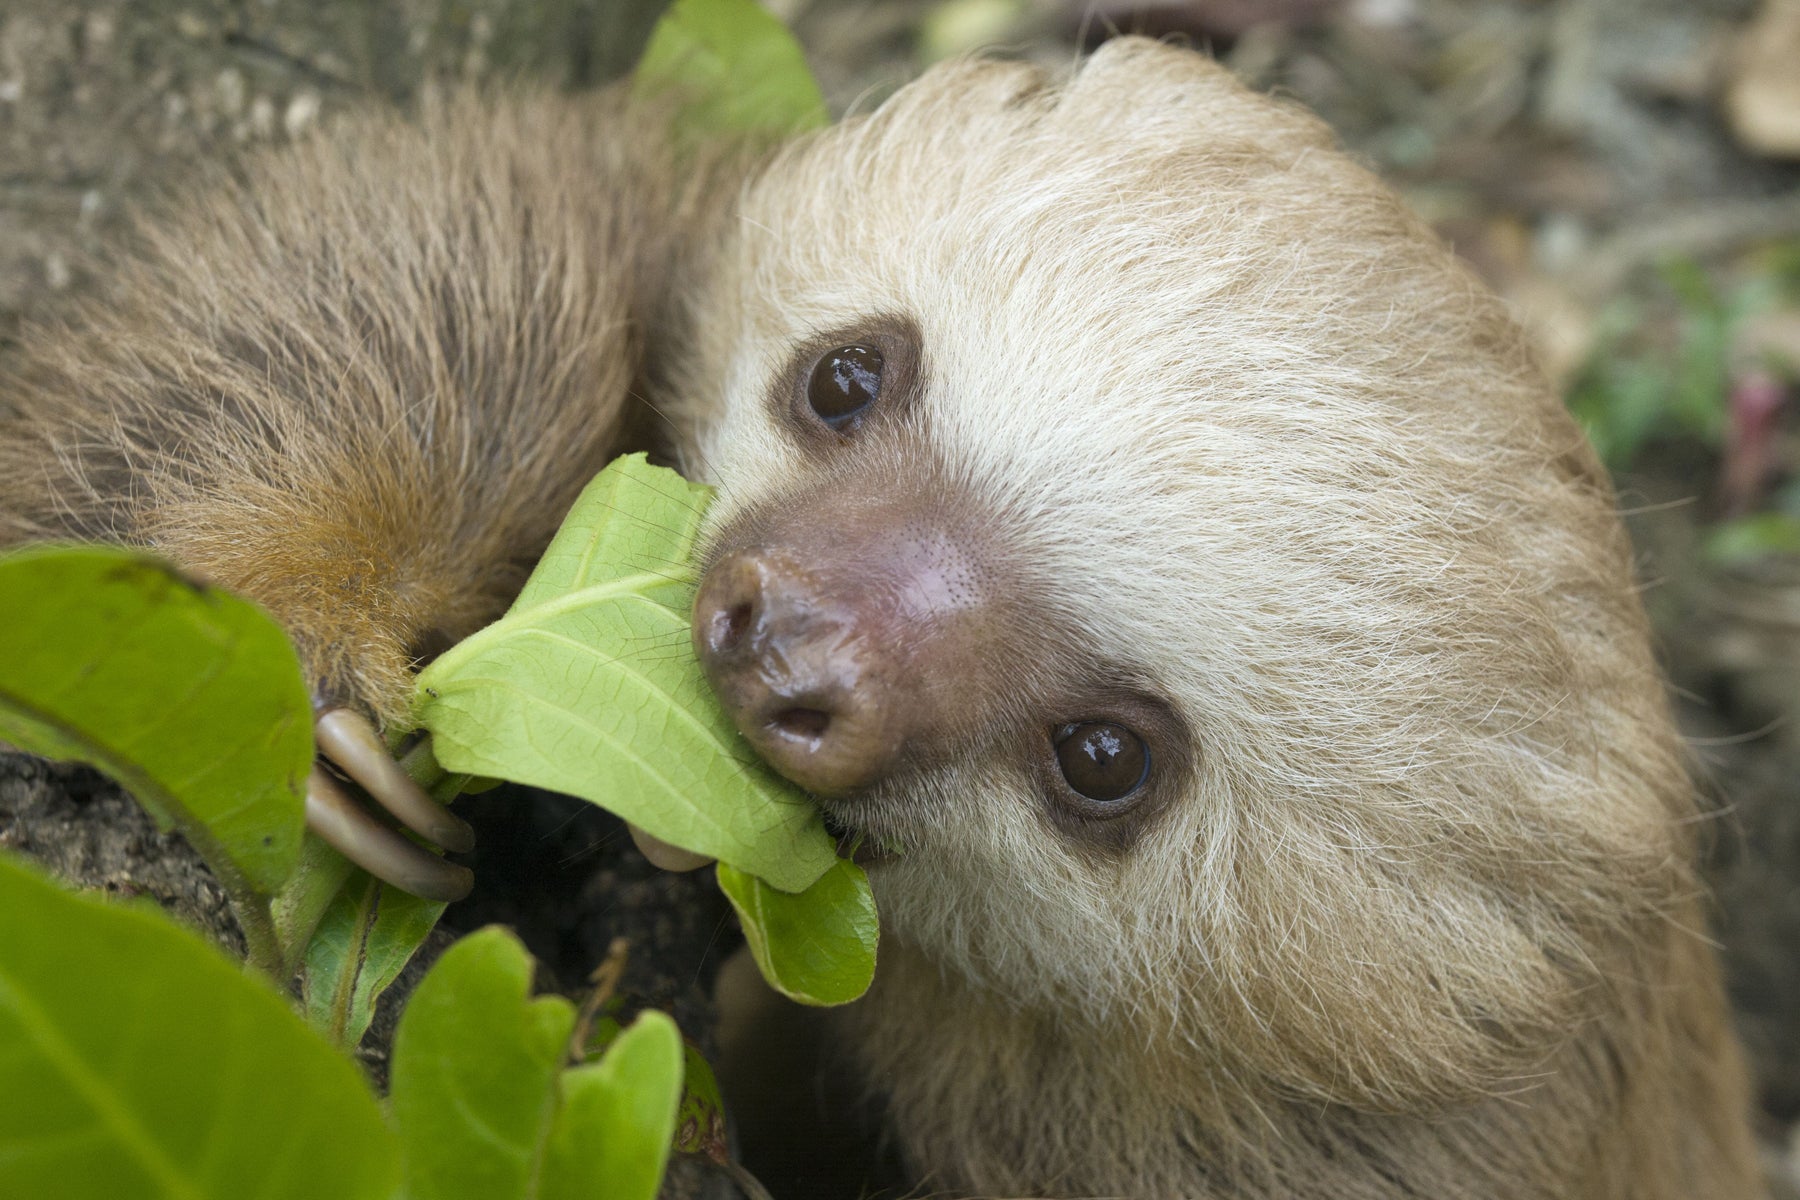 A young sloth